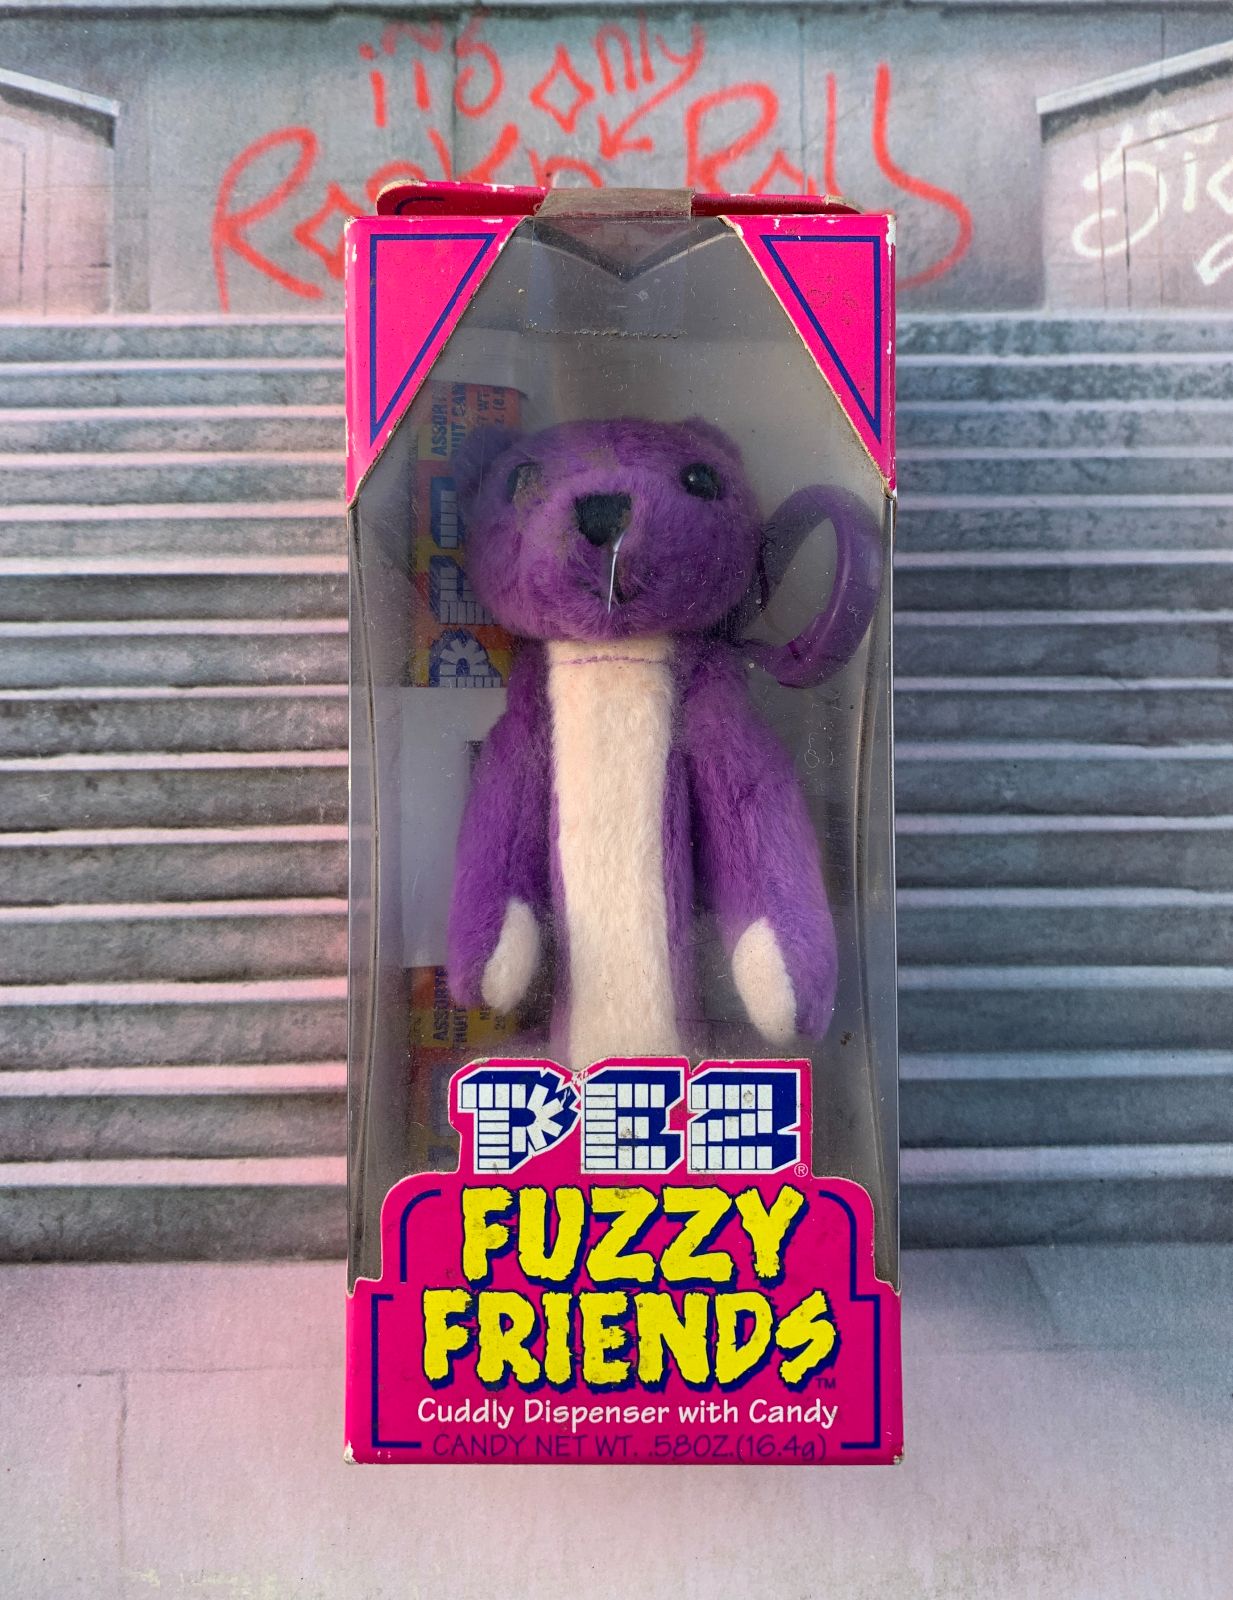 product details: FUZZY FREINDS PEZ DISPENSER NEW IN PACKAGE photo